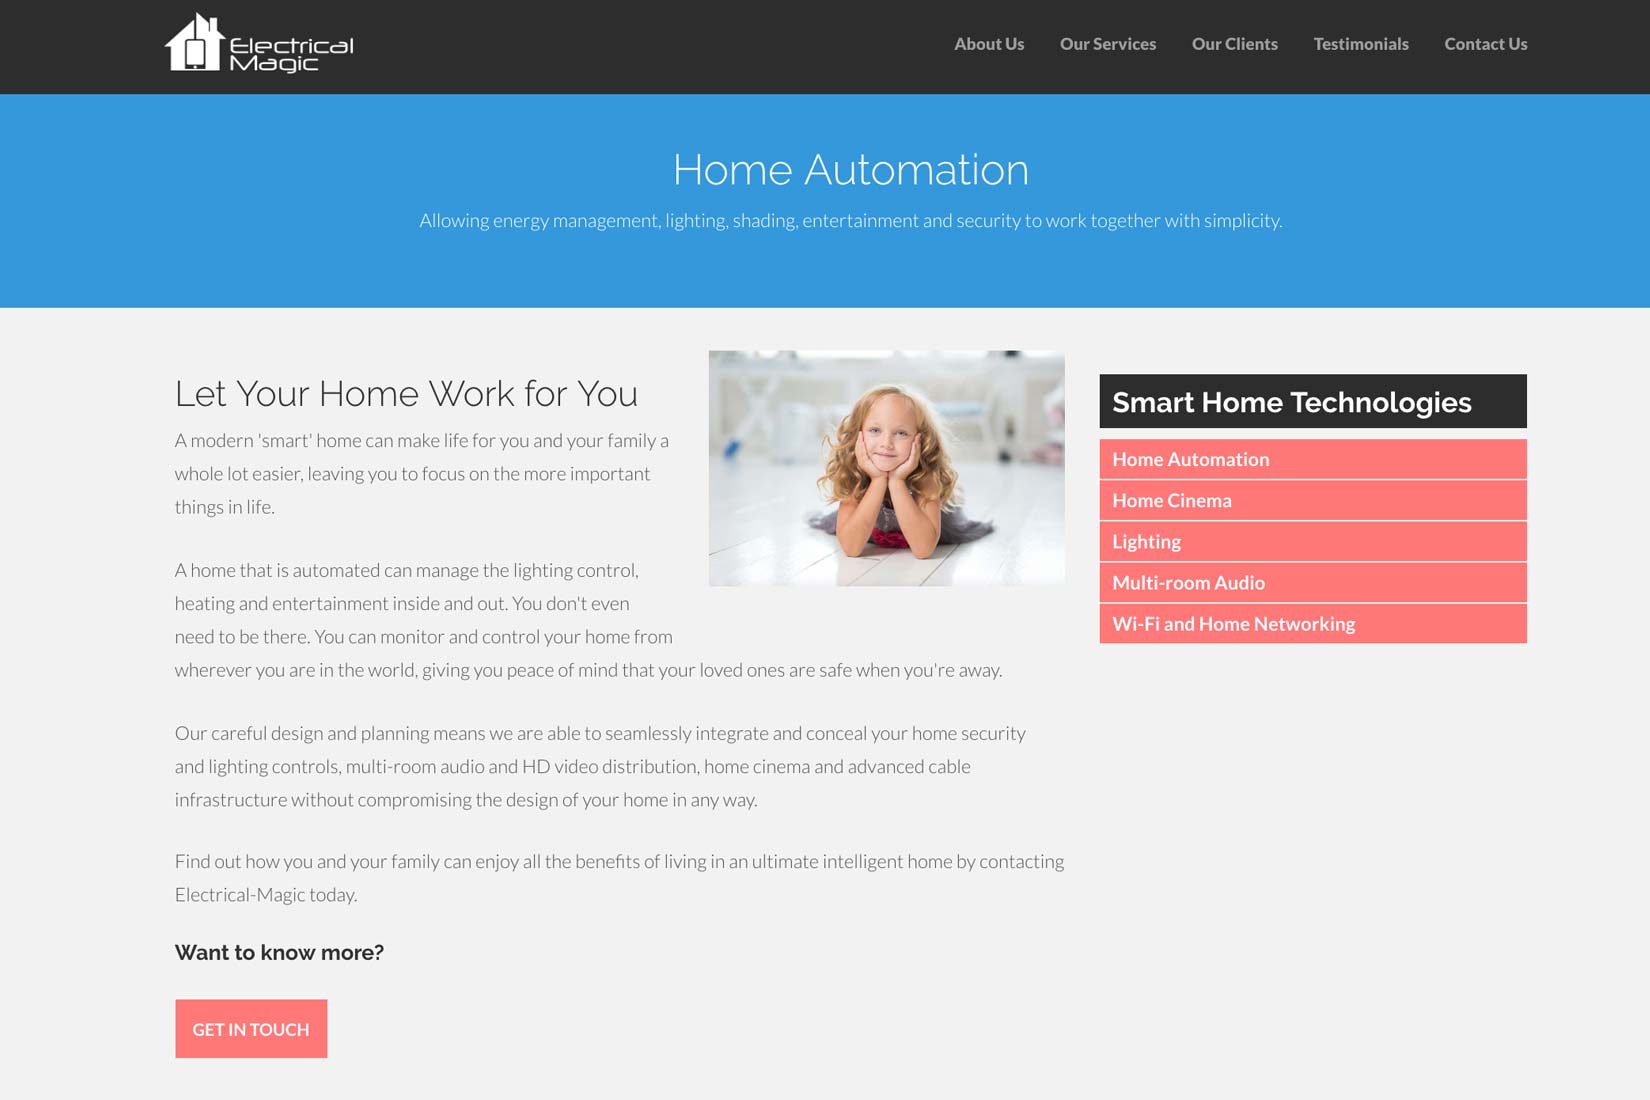 Electrical Magic Home Automation page built by Presto Web Design